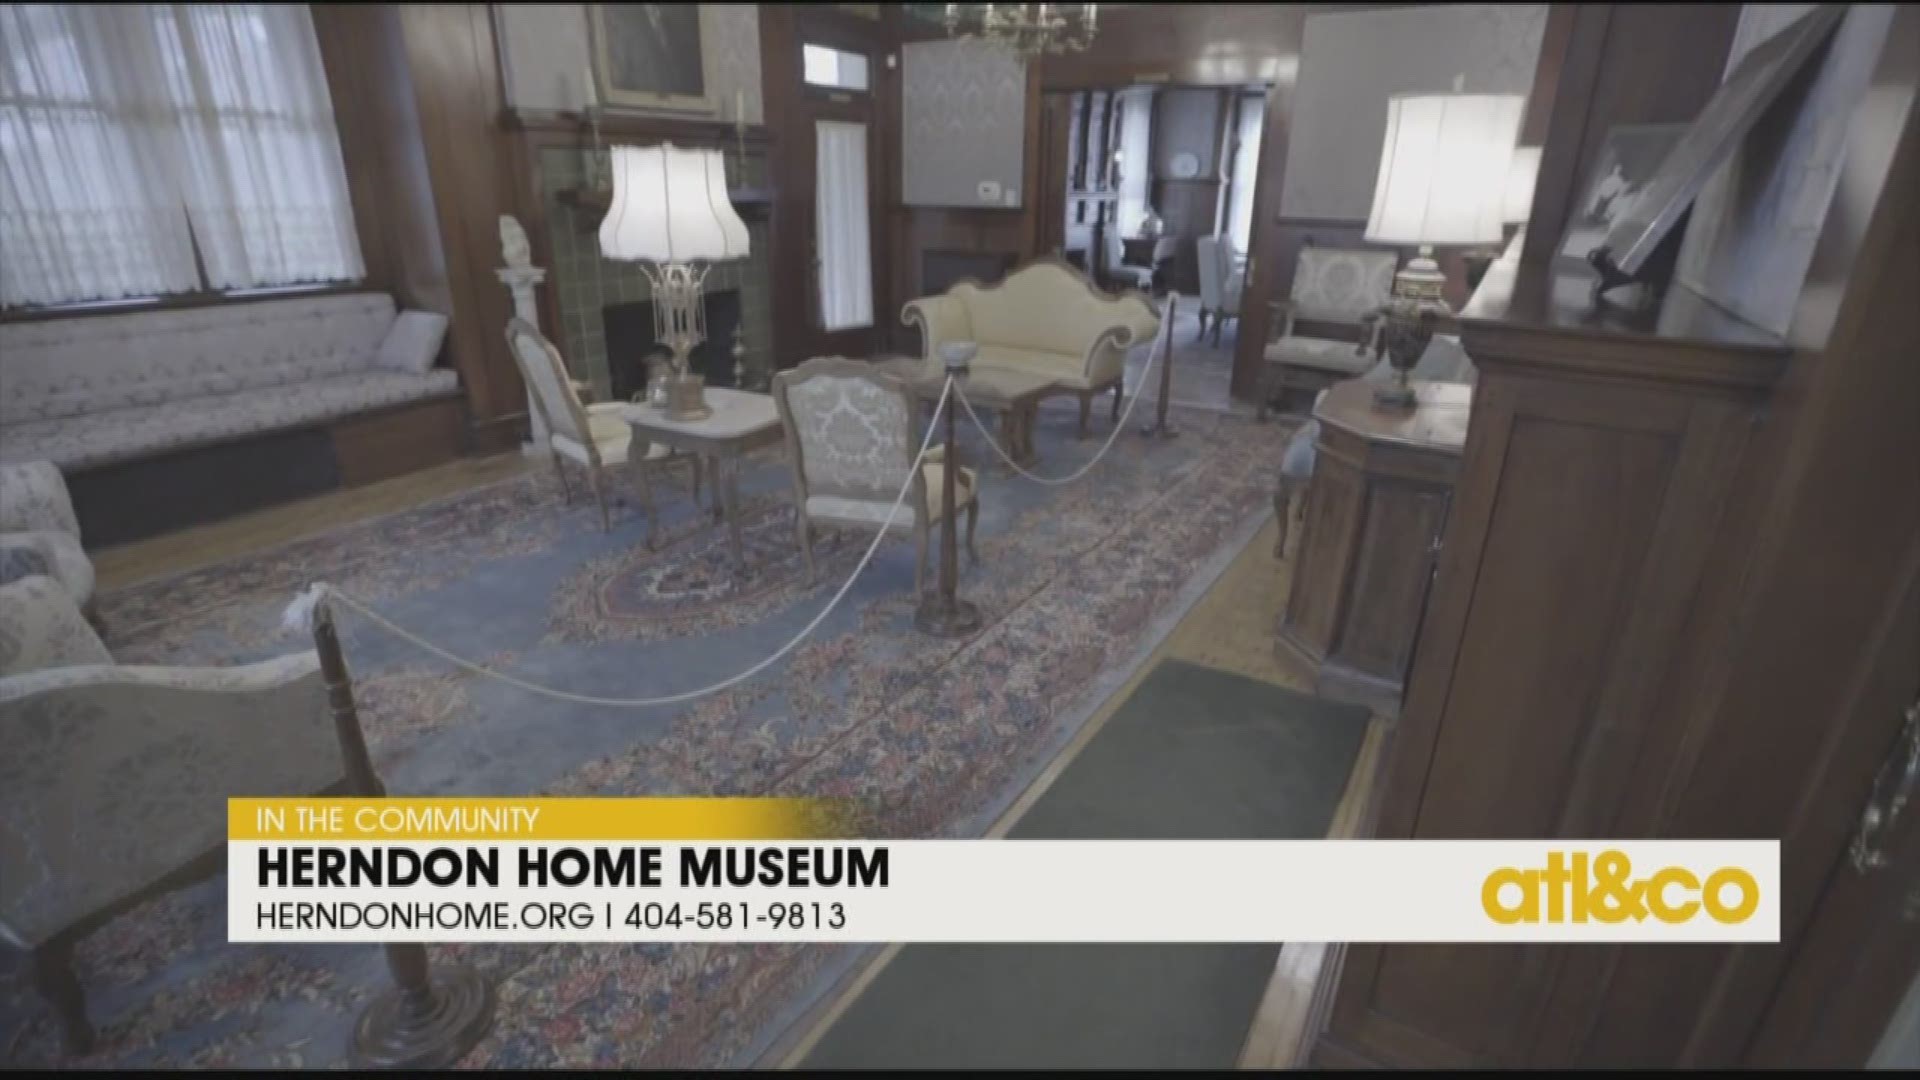 Learn about The Alonzo F. & Norris B. Herndon Foundation in association with Atlanta Life Insurance Company as Chelsey McNeil takes us inside the Herndon Home Museum